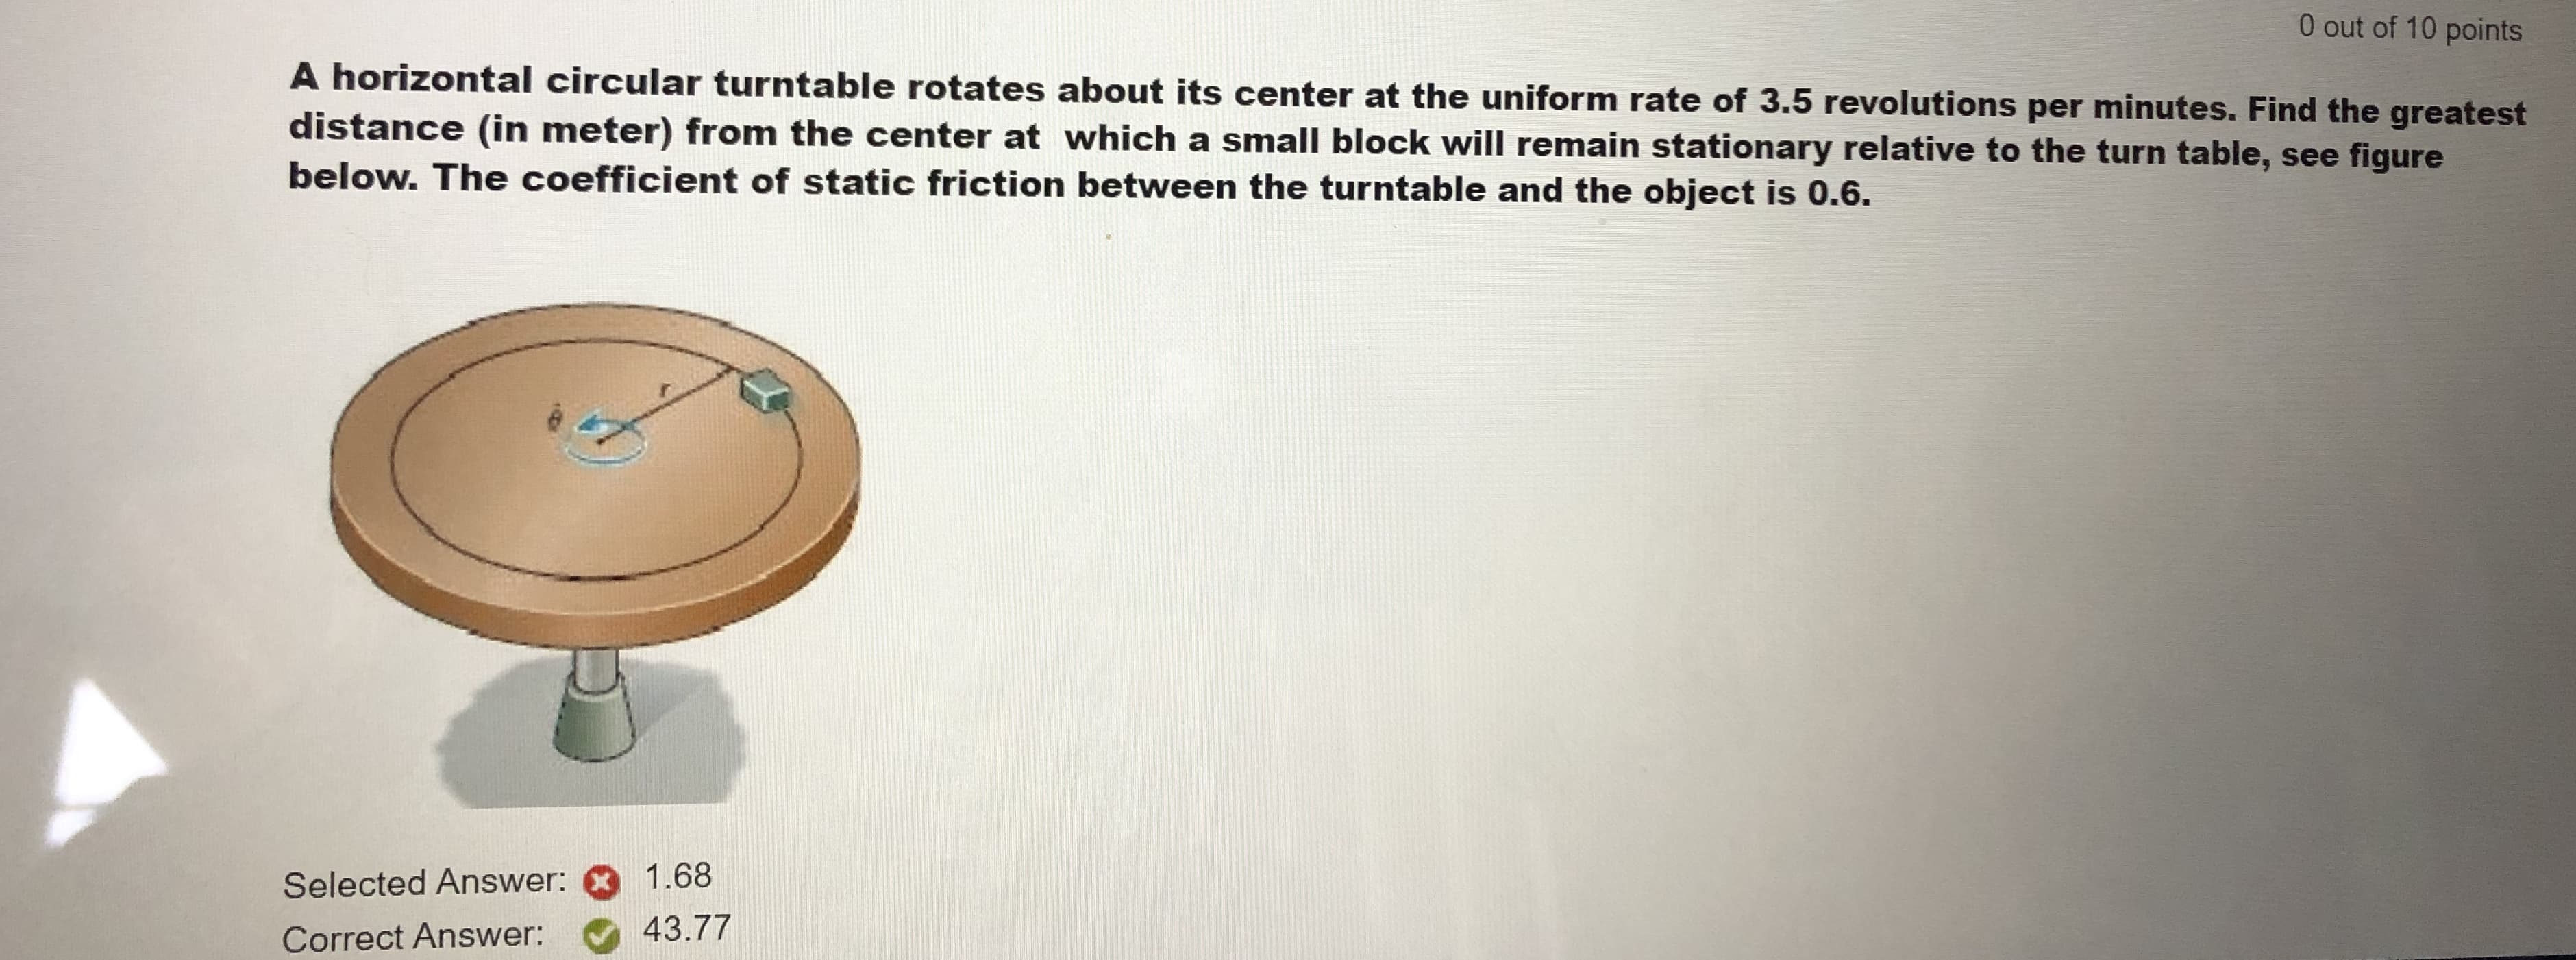 0 out of 10 points
A horizontal circular turntable rotates about its center at the uniform rate of 3.5 revolutions per minutes. Find the greatest
distance (in meter) from the center at which a small block will remain stationary relative to the turn table, see figure
below. The coefficient of static friction between the turntable and the object is 0.6.
Selected Answer:
1.68
Correct Answer:
43.77
